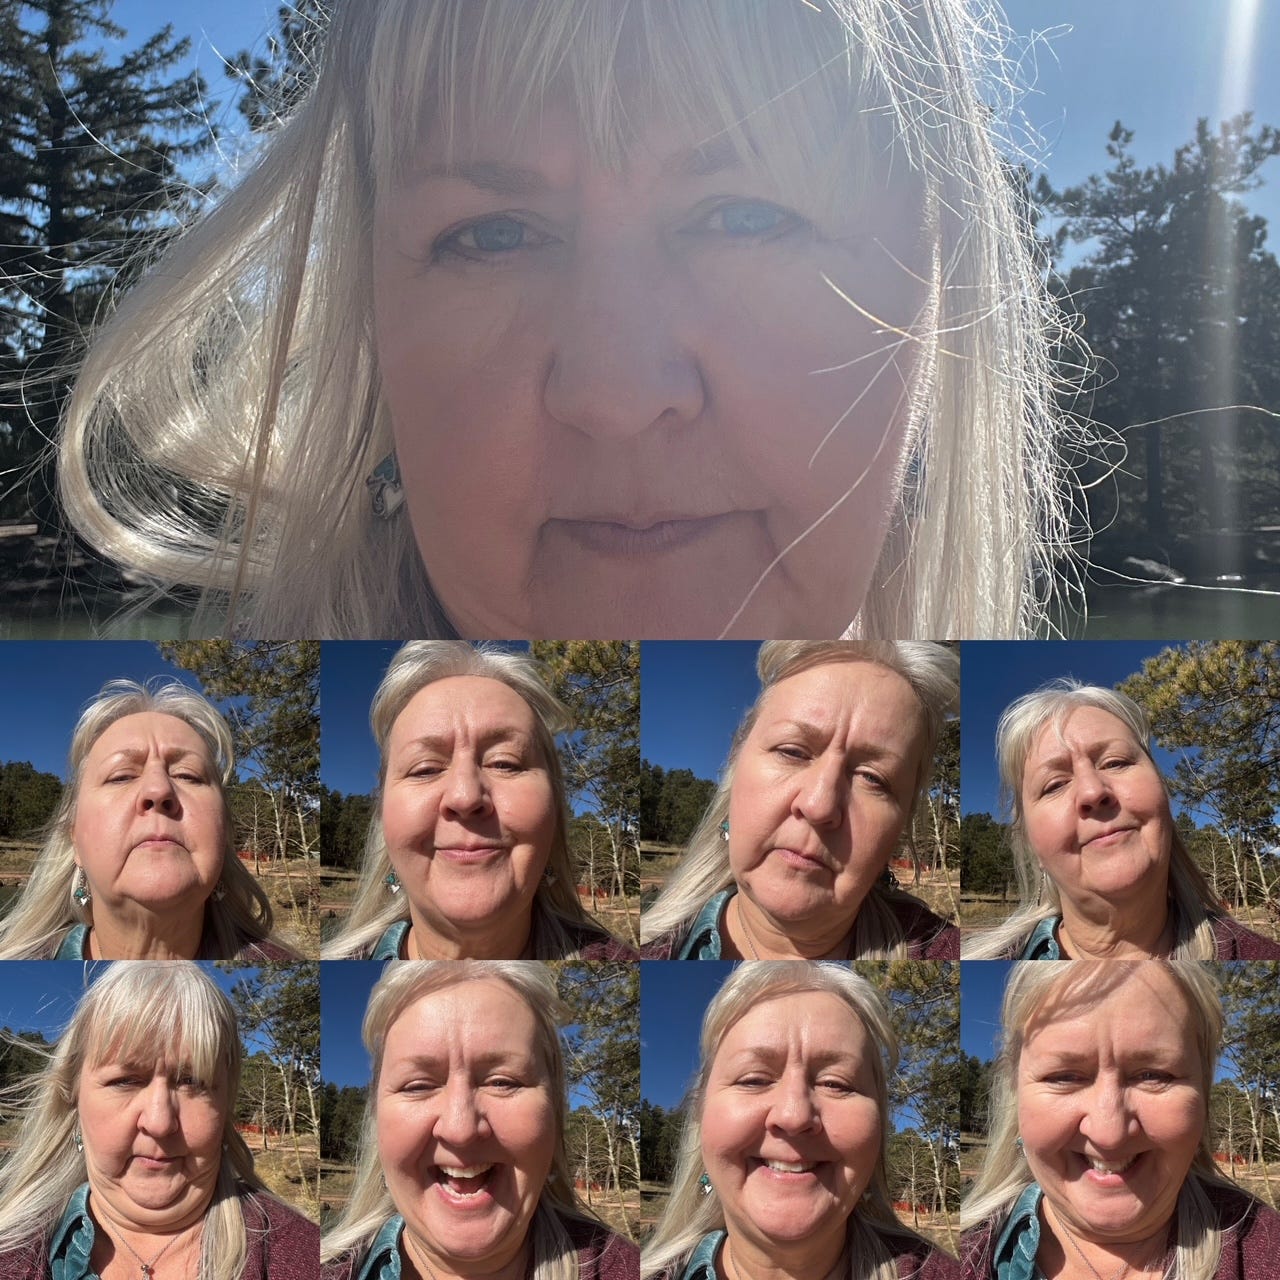 A collage of a person

Description automatically generated